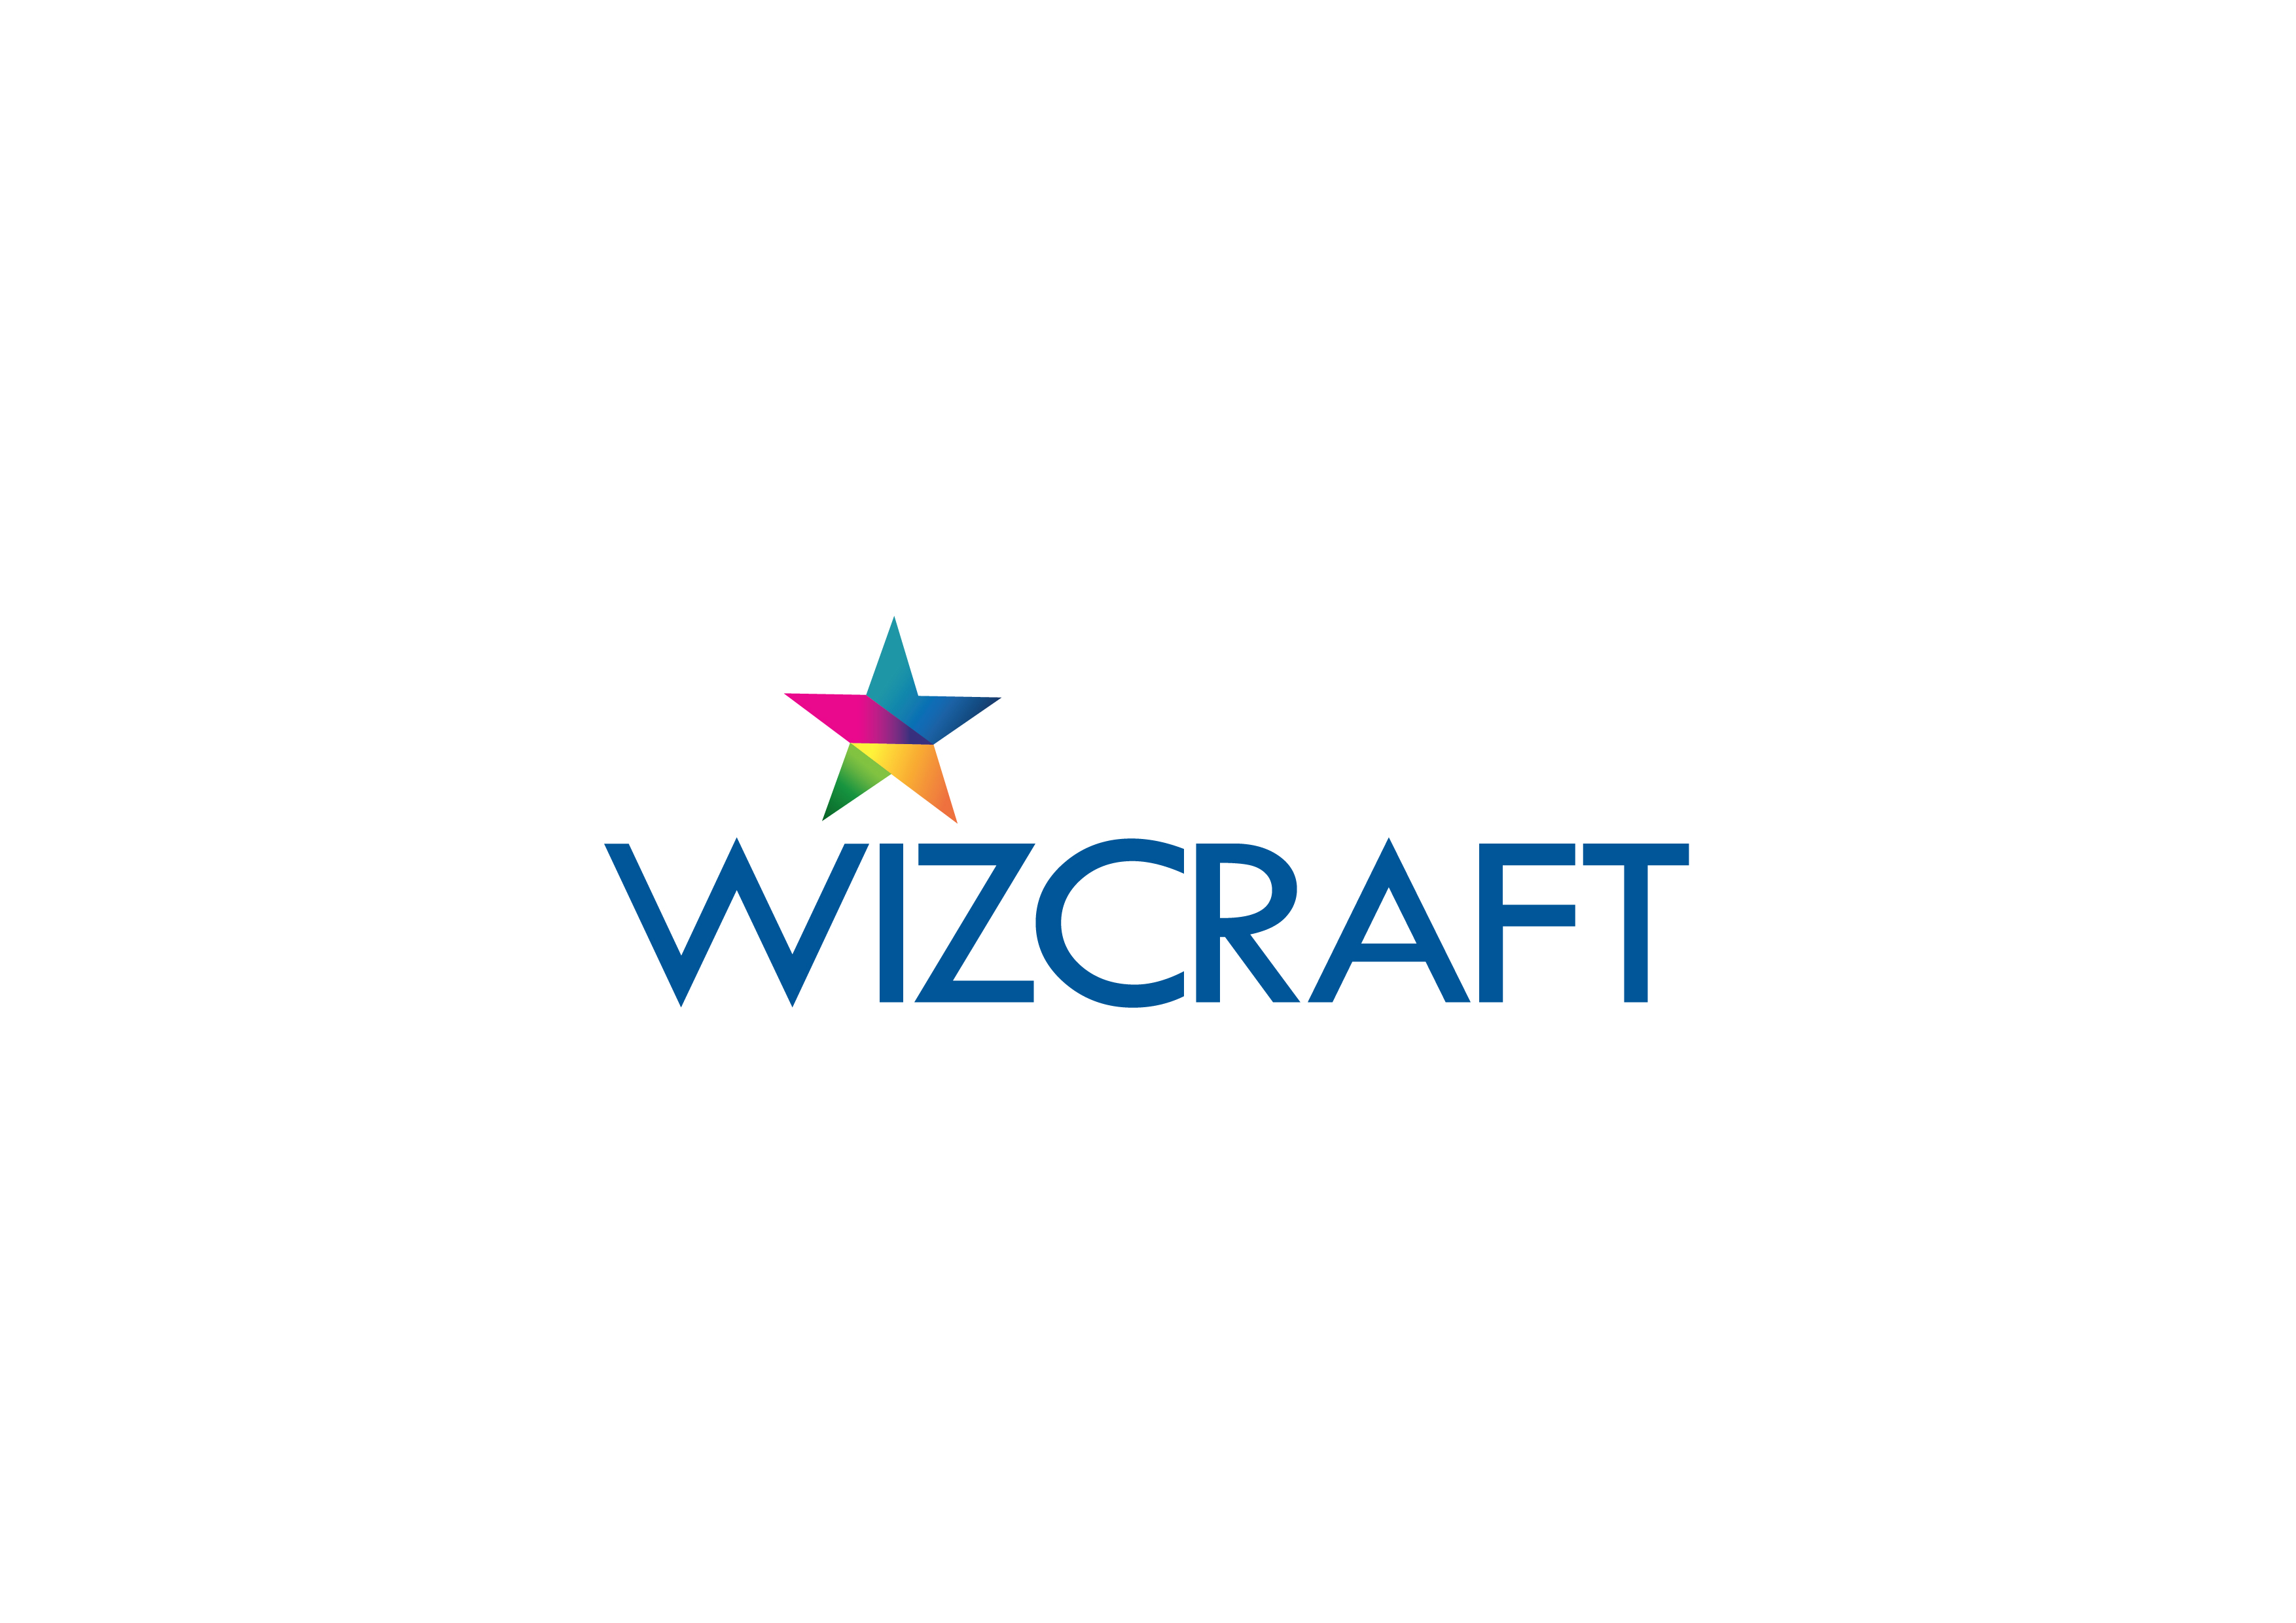 wizcraft commemorates its glorious 27-year journey in the events industry with an all new brand identity proving 'blue is the new red' | global prime news